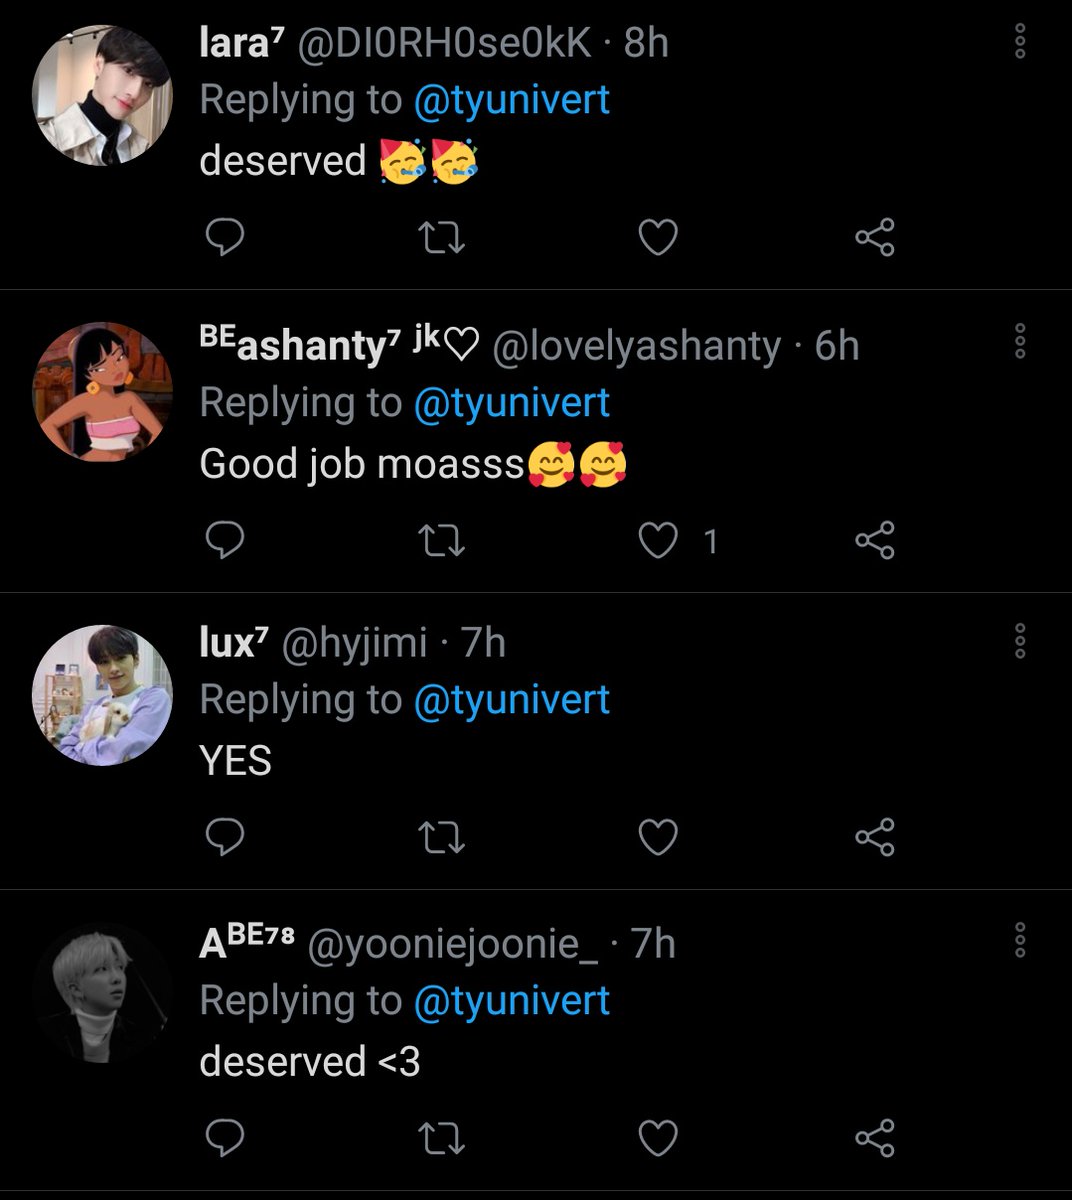 a moa tweeted about txt surpassing bts on choeaedol and look at the replies of armys,,,, this is what you call healthy competition and i love what im seeing  @TXT_members  @BTS_twt